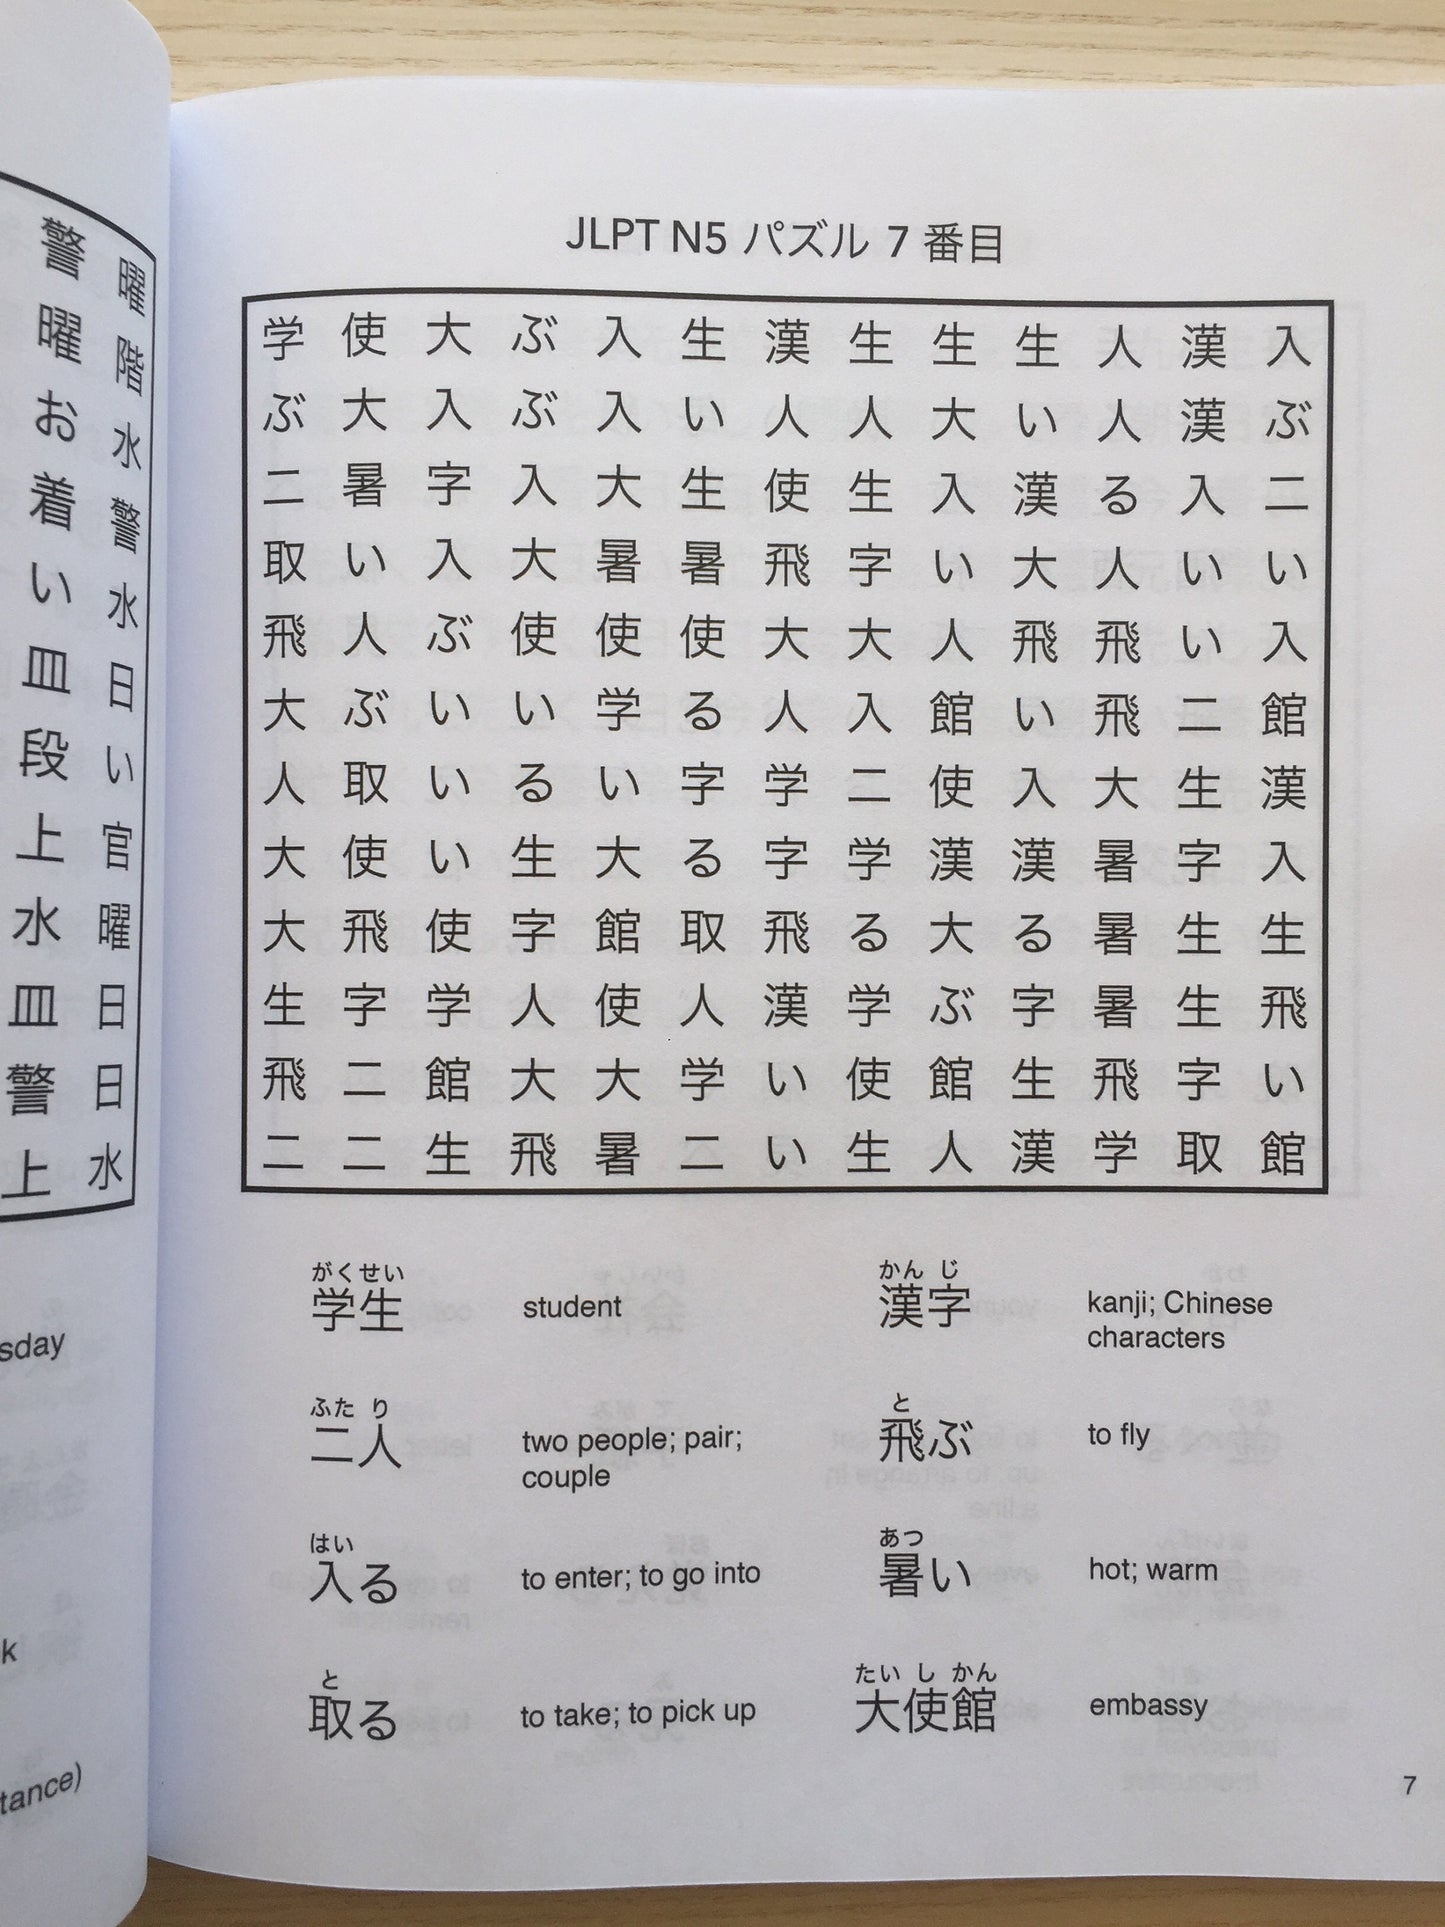 JLPT N5 Japanese Vocabulary Word Search: Kanji Reading Puzzles to Master the Japanese-Language Proficiency Test